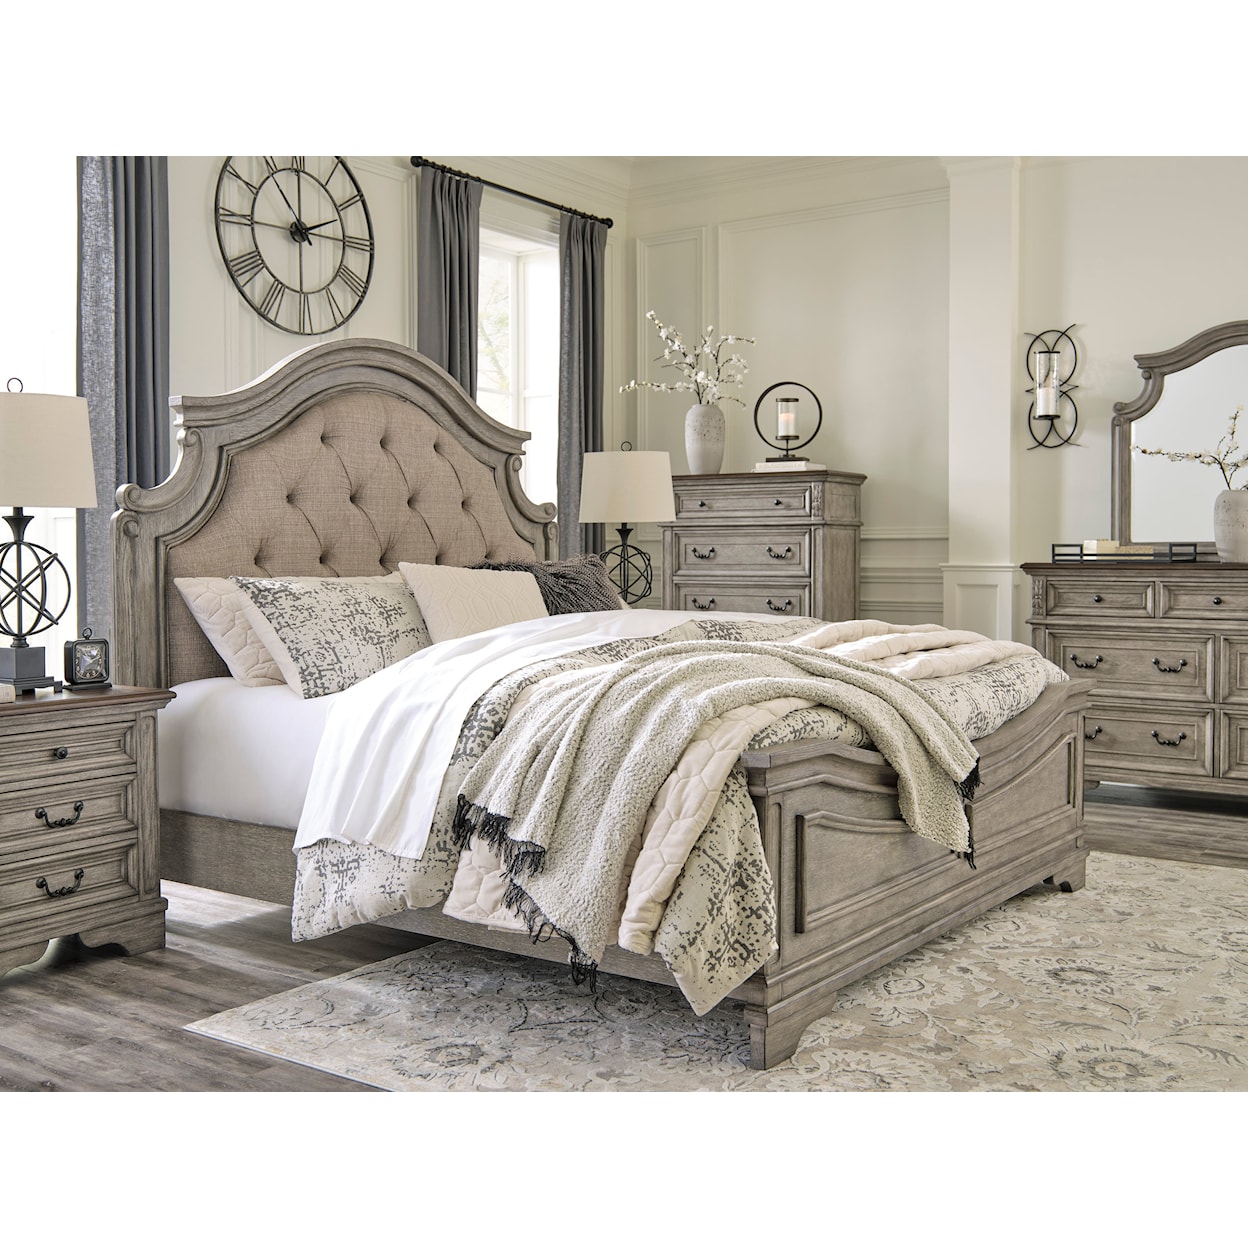 Signature Design by Ashley Lodenbay 5 Piece King Bedroom Set